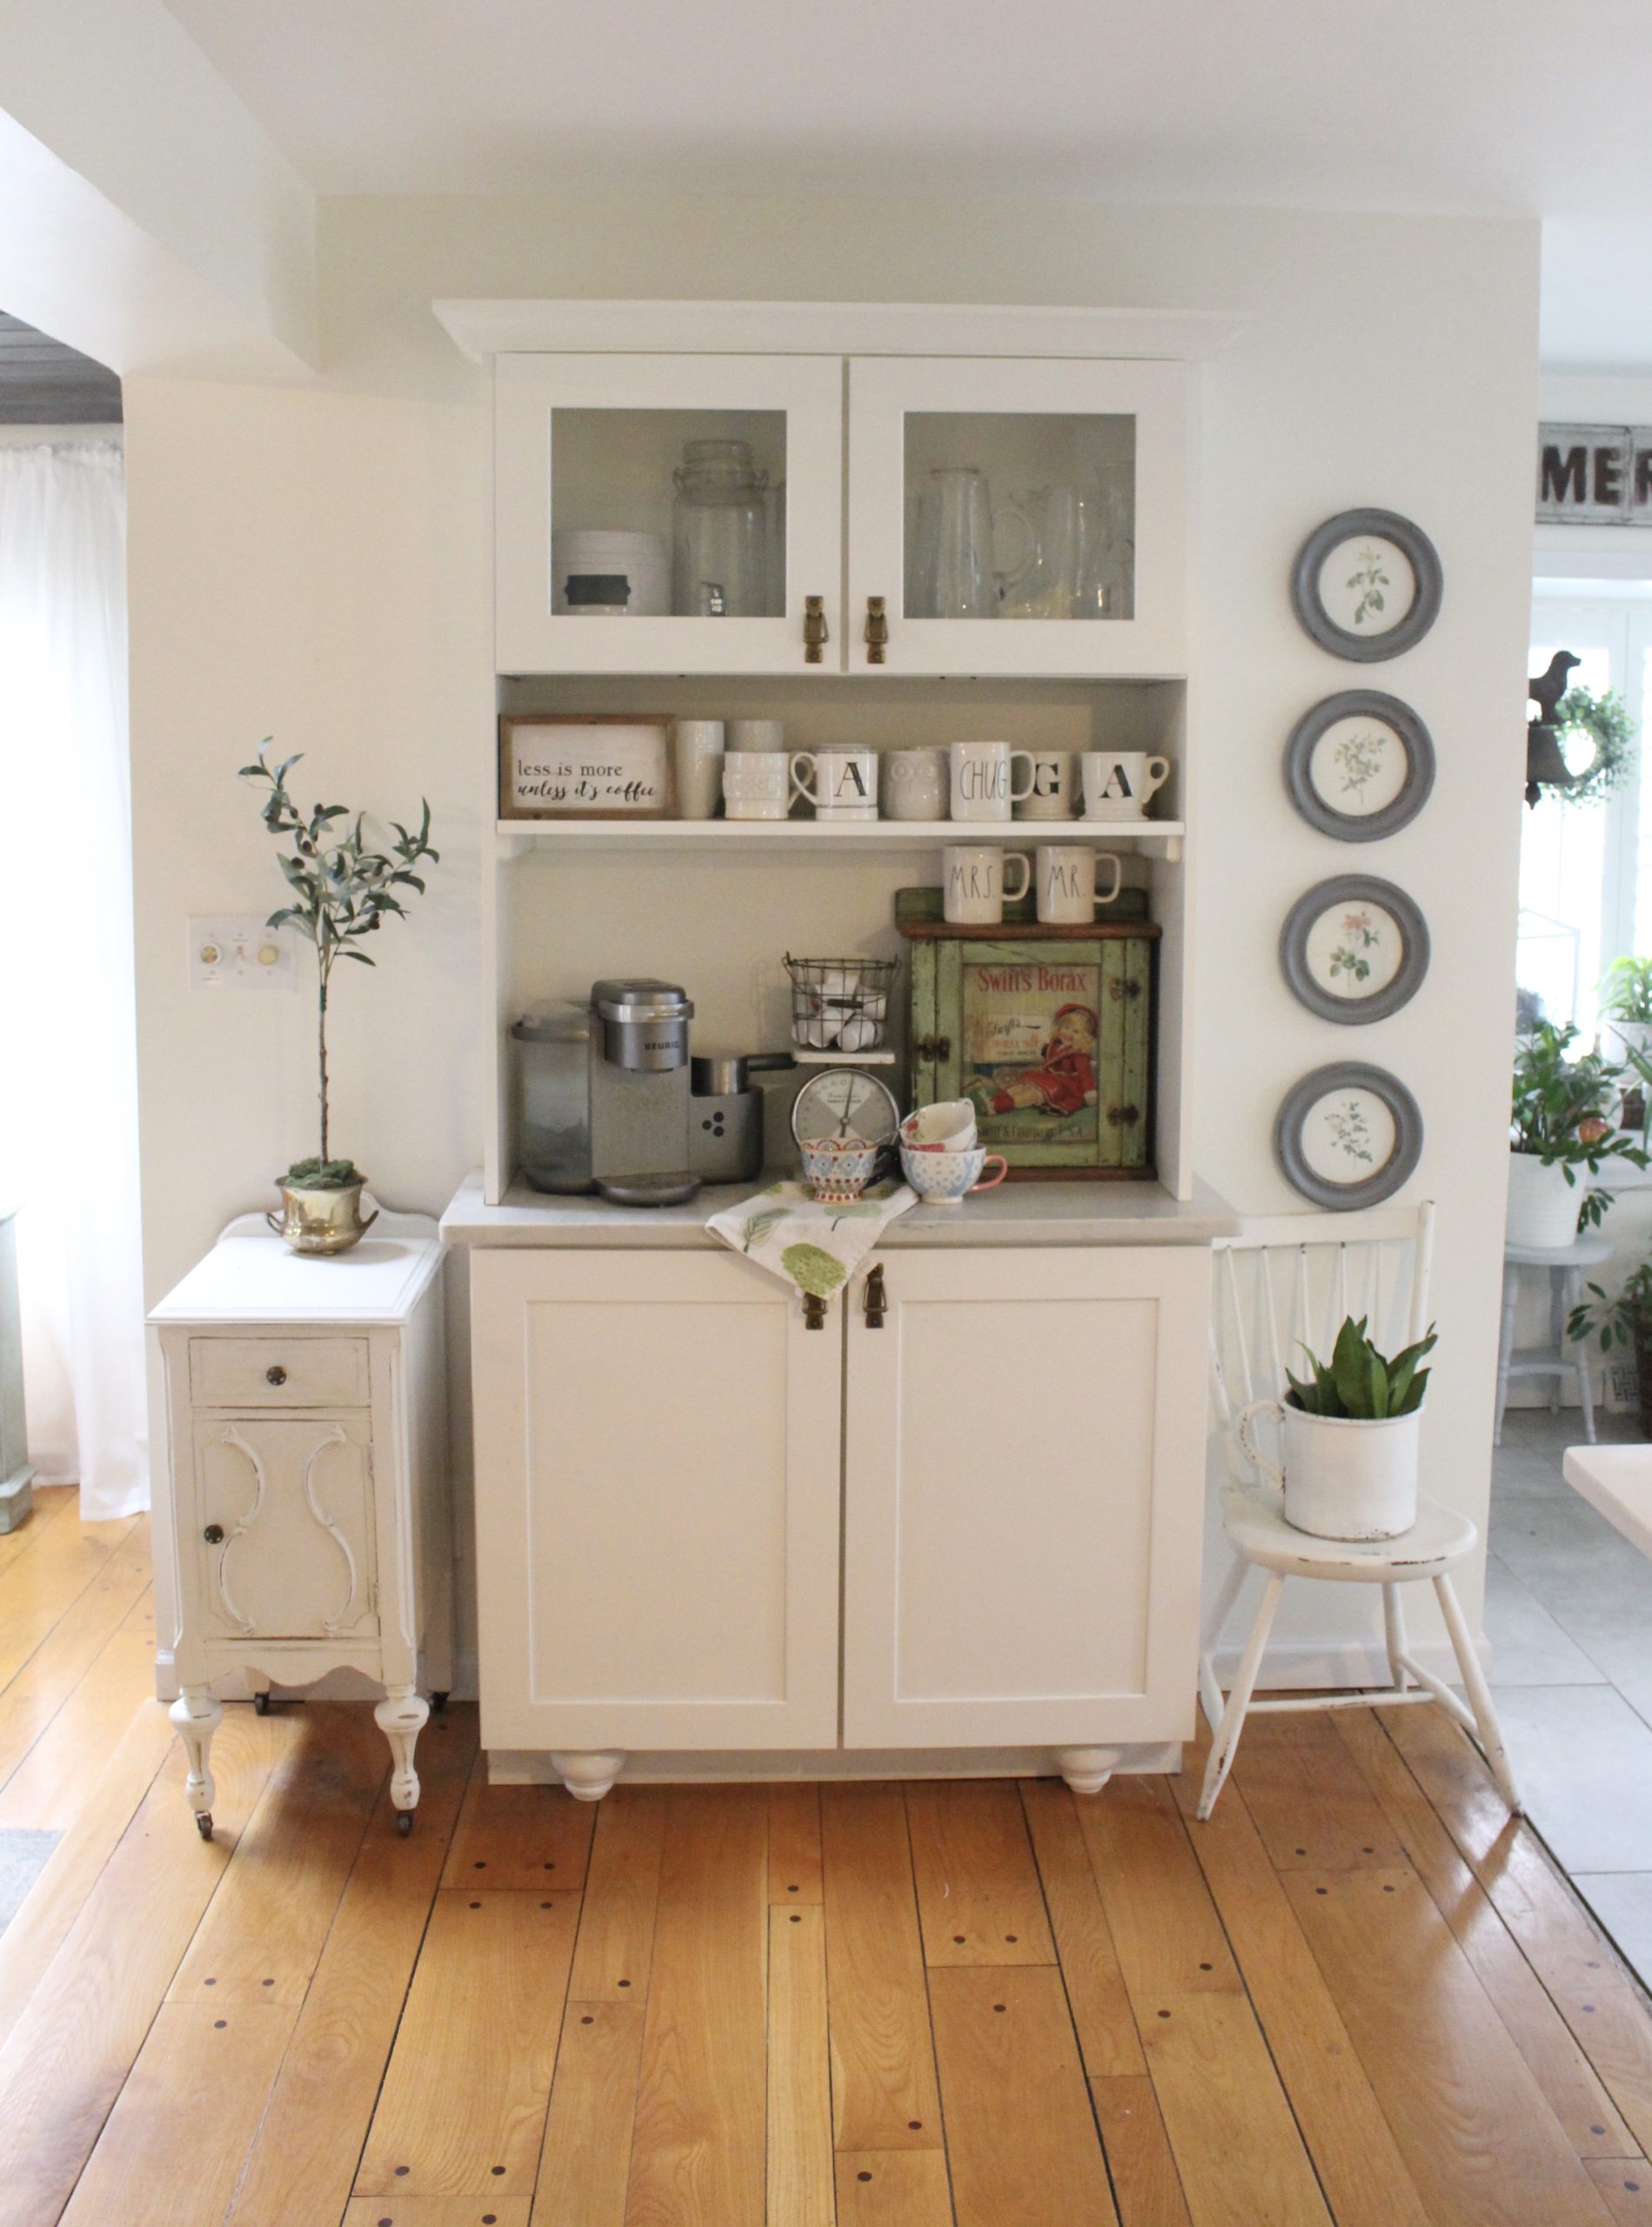 Thrift Store Cabinet Updated with Chalk Paint for a Coffee Bar.- diy- projects- painting furniture- using chalk paint- updating furniture- rusteoleum linen white chalk paint- coffee bar